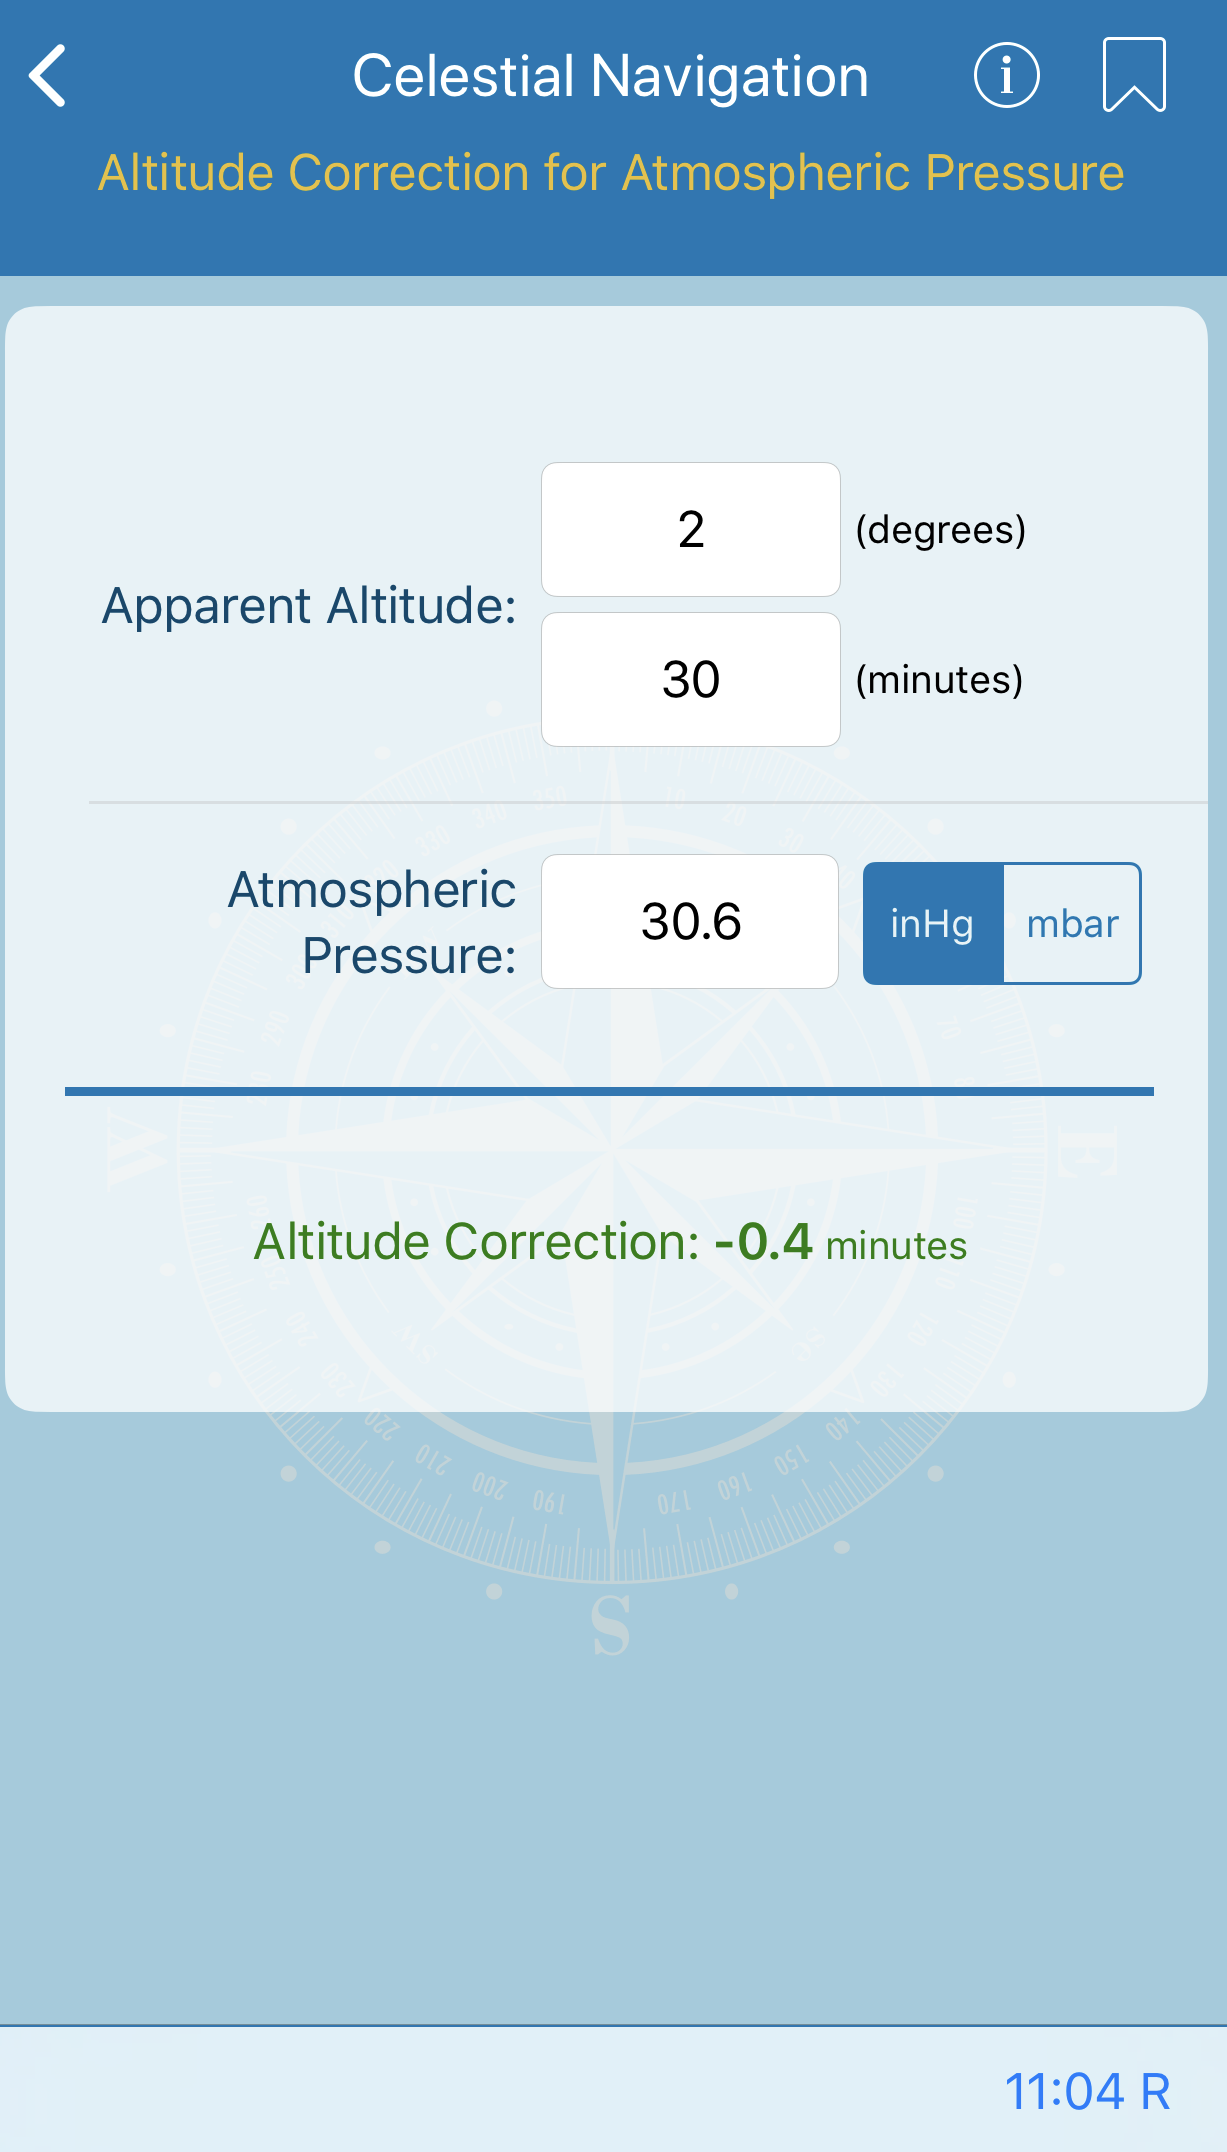 Altitude Correction for Atmospheric Pressure